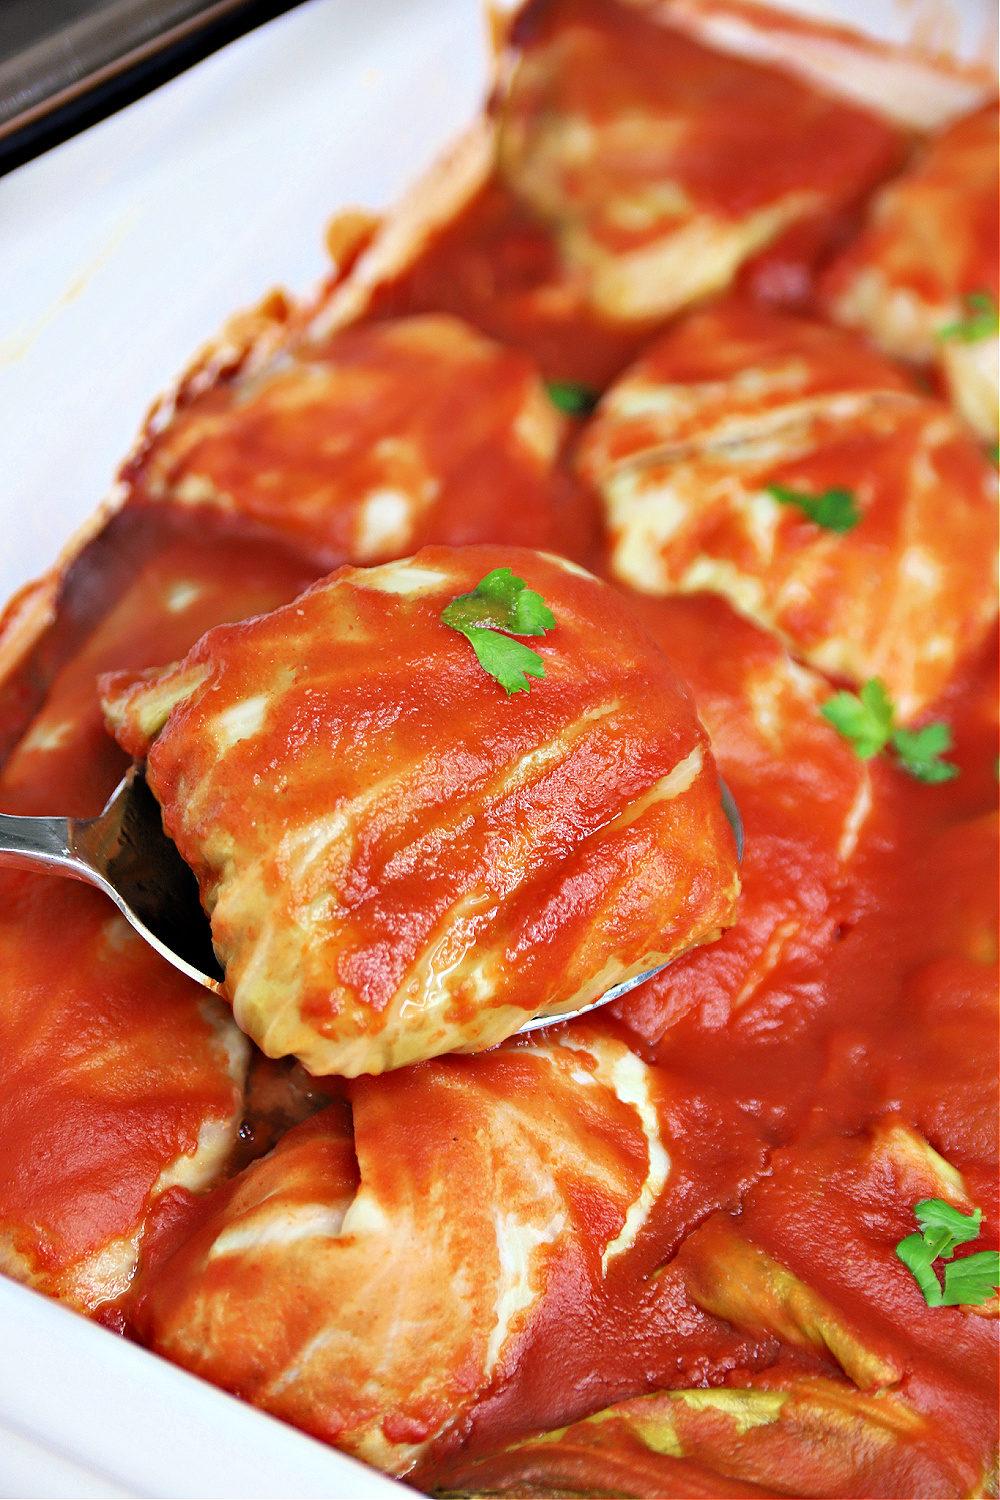 Easy slow cooker recipe for Swedish cabbage rolls filled with ground beef and rice in a tasty sauce is a comforting and satisfying Sunday dinner and on those busy days when a crockpot meal is helpful .